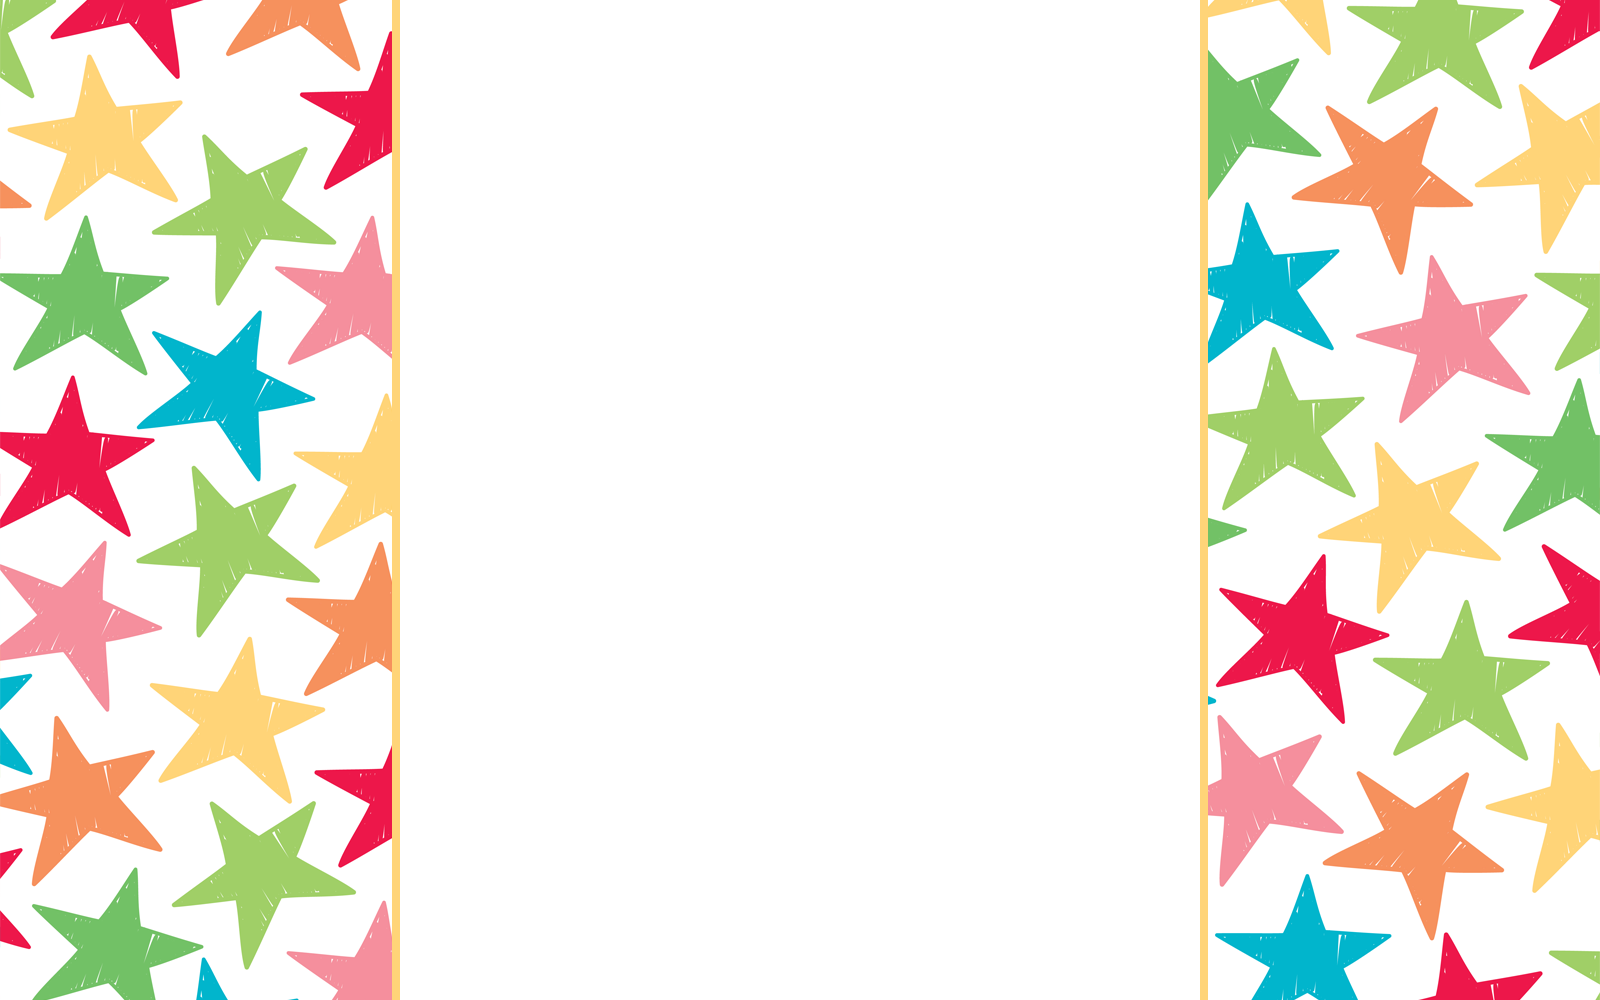 10 Star Border Clip Art Free Cliparts That You Can Download To You